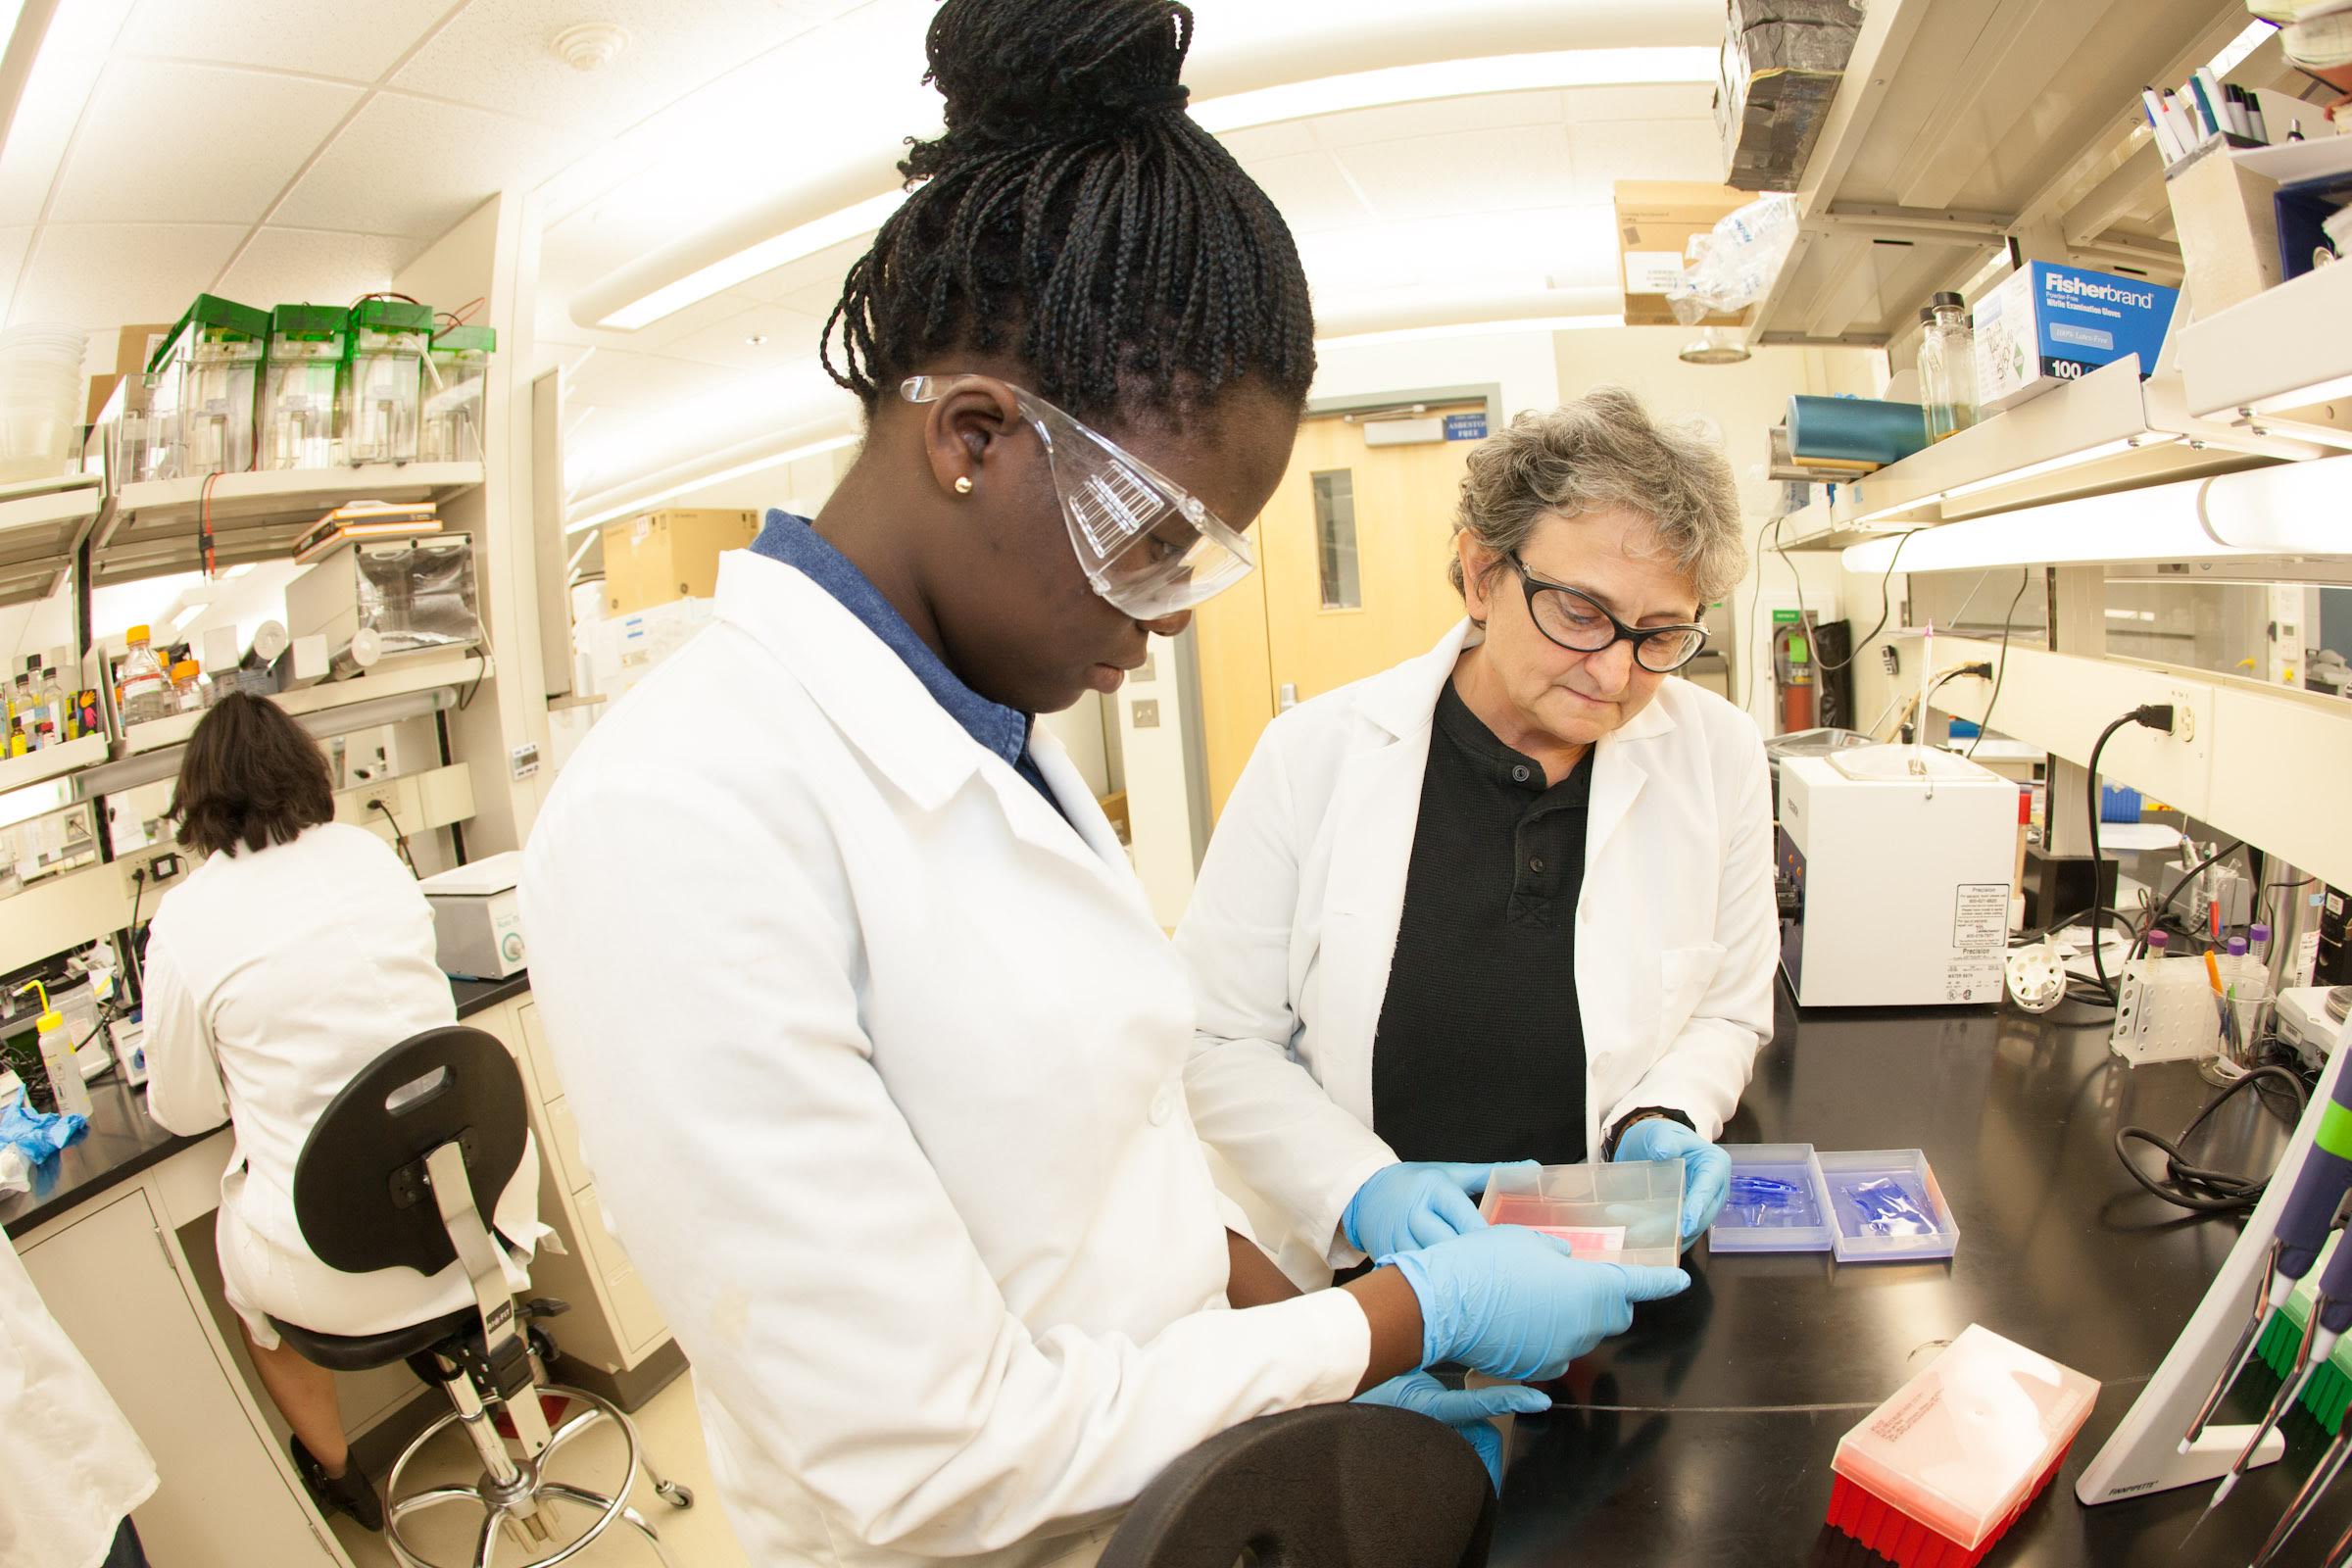 Ololade Olwale (left) and teacher, Paula Dell of Chicago look at samples taken in Antarctica at the Arcic health and Research Building.